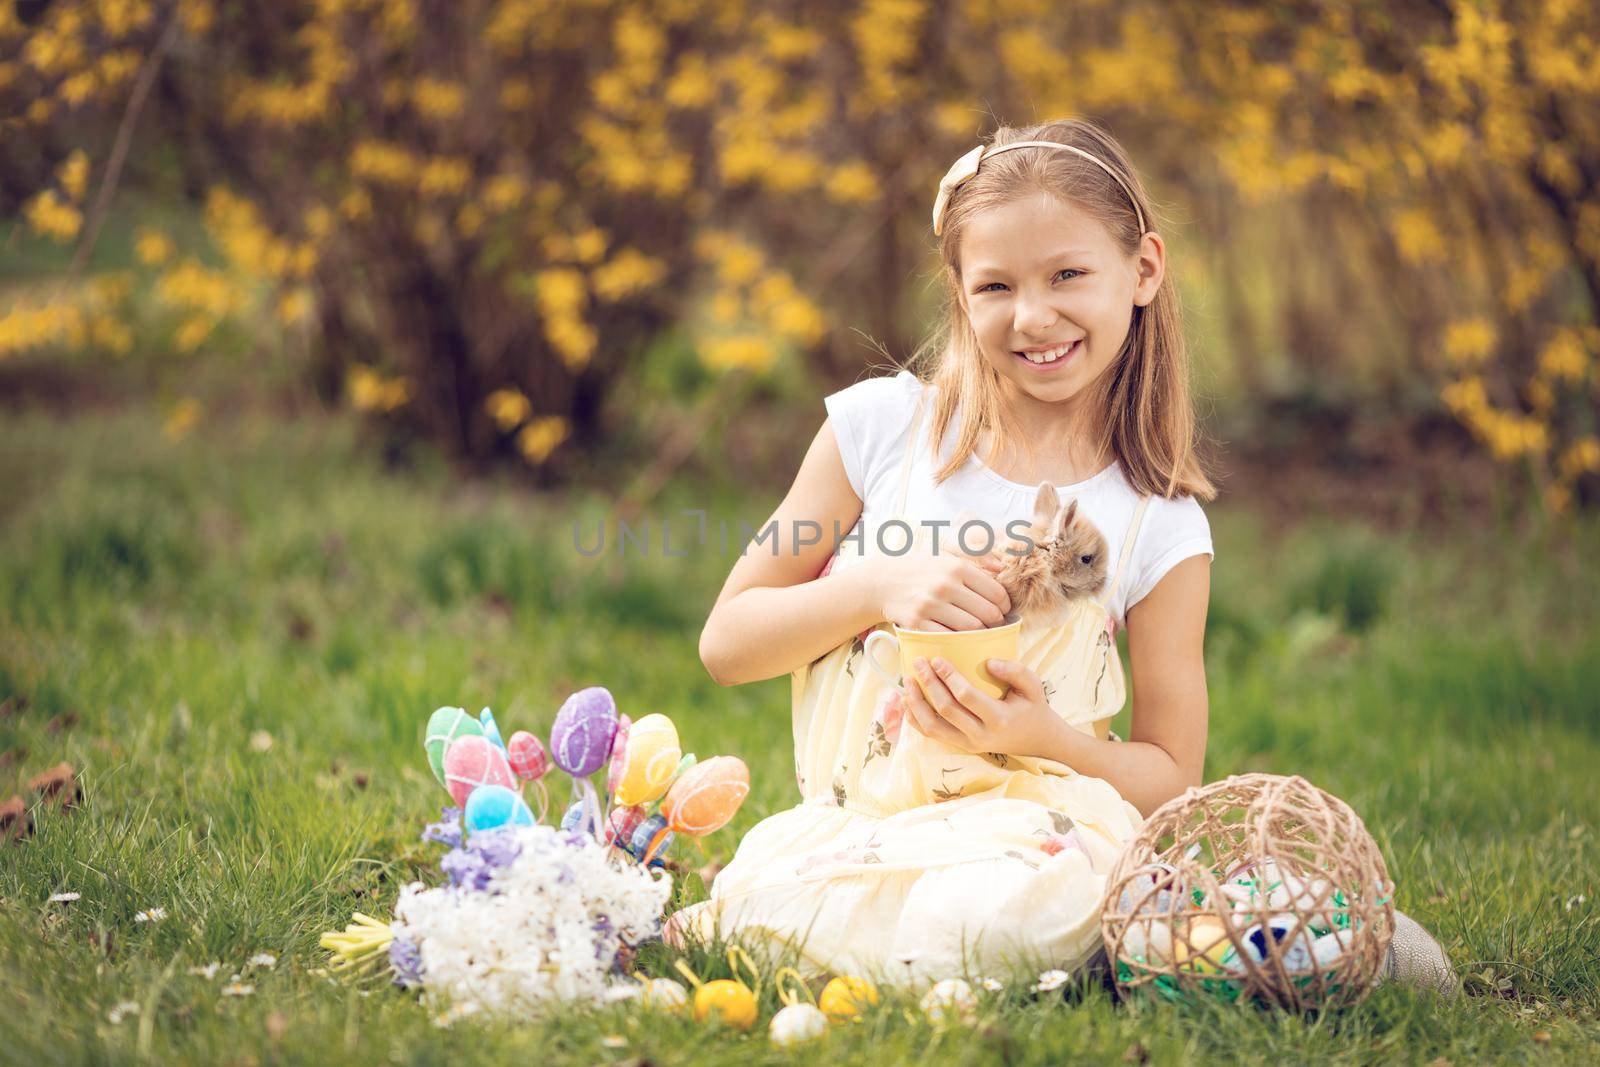 Easter Bunny And Little Girl by MilanMarkovic78